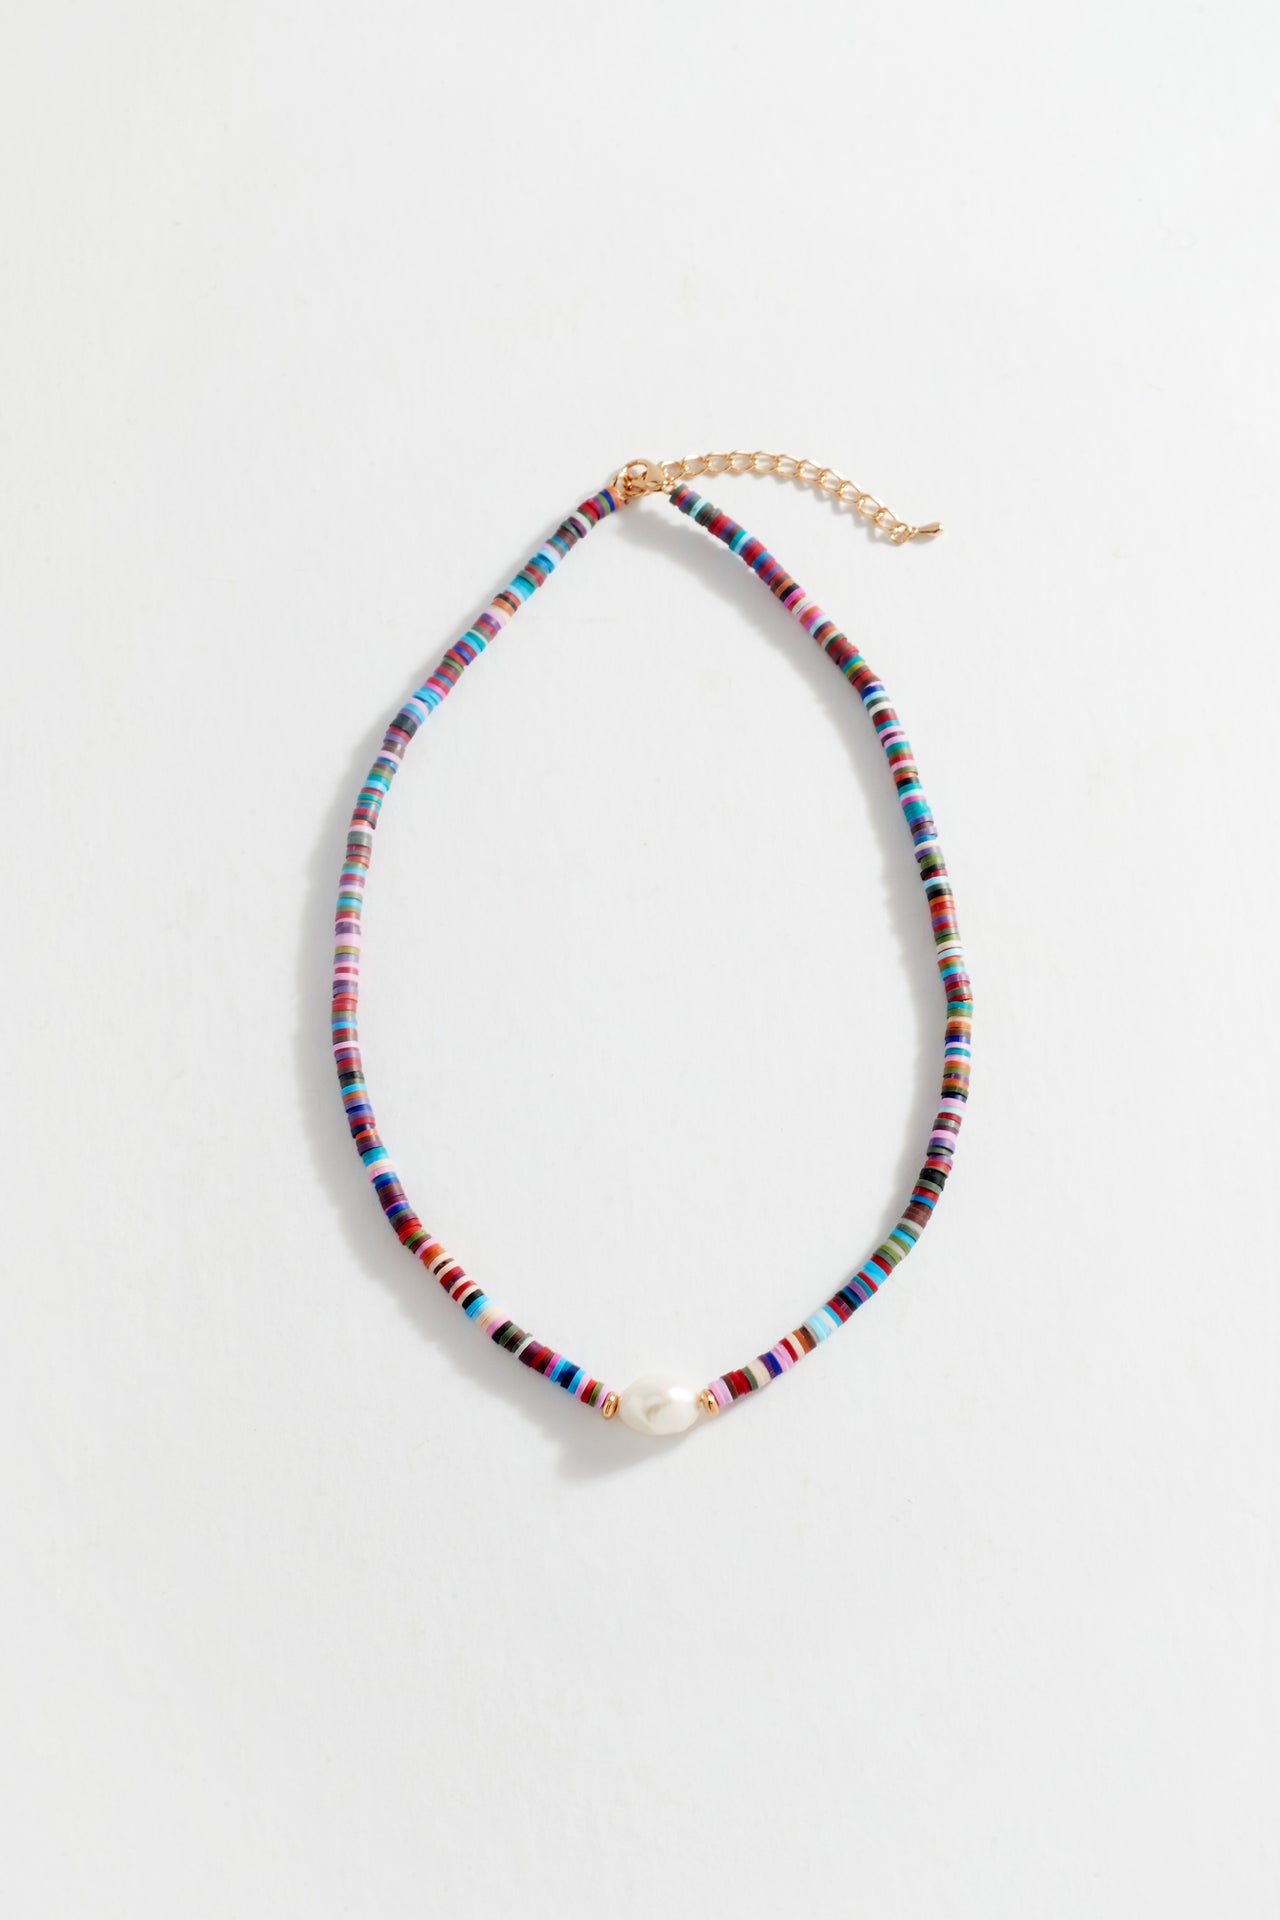 Festival Necklace in Blue/Brown